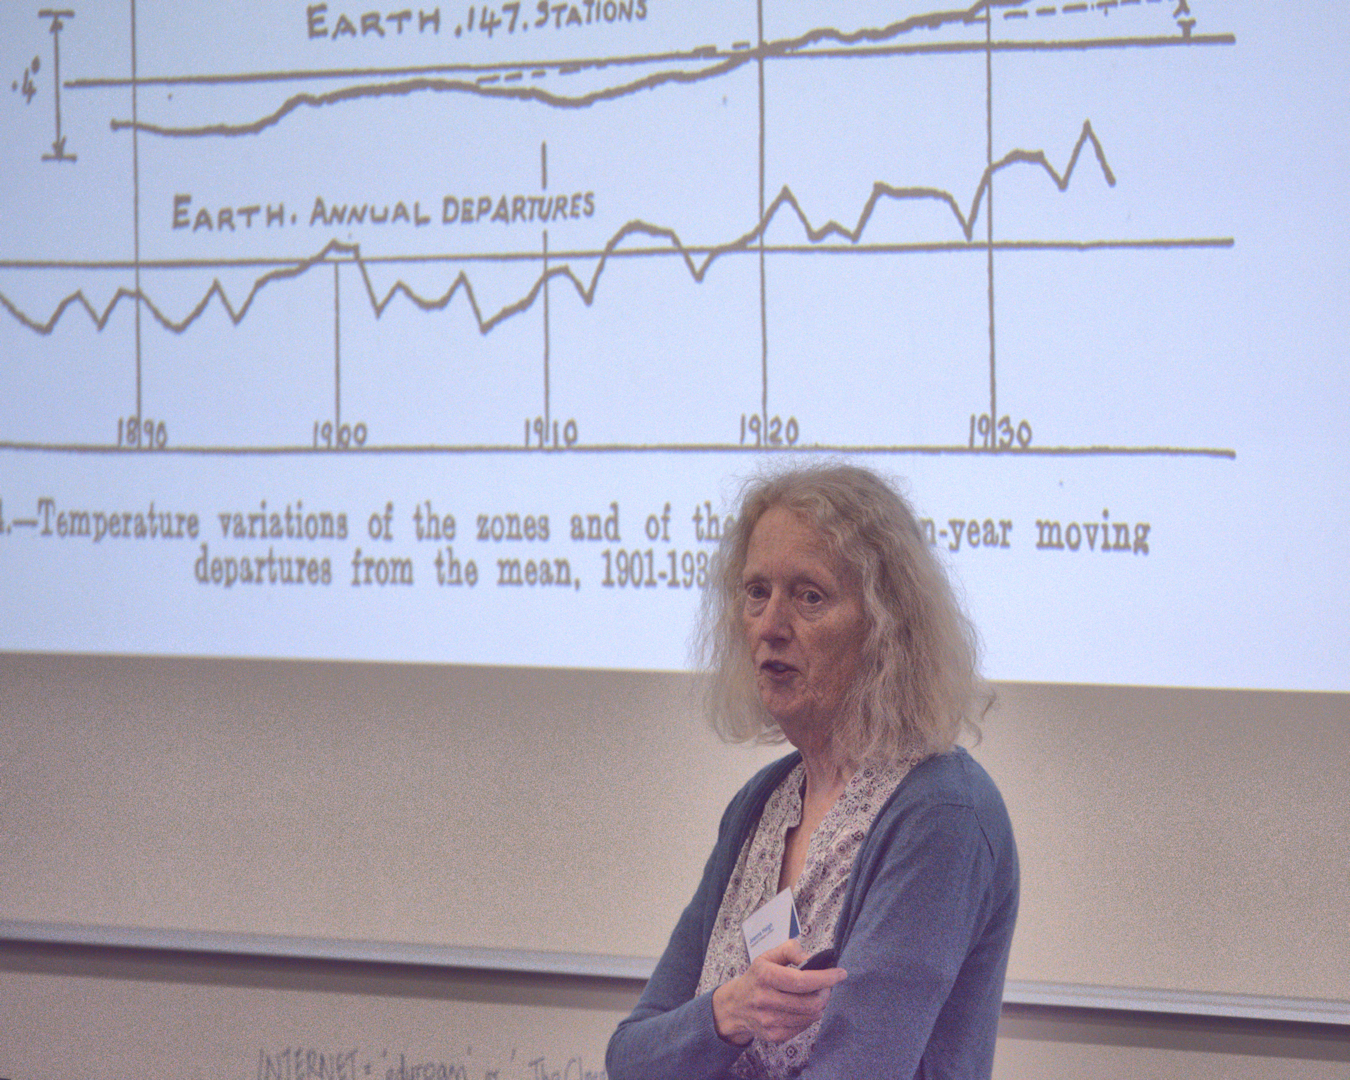 Joanna D. Haigh discusses Advances in Climate Science through the Pages of the QJ.